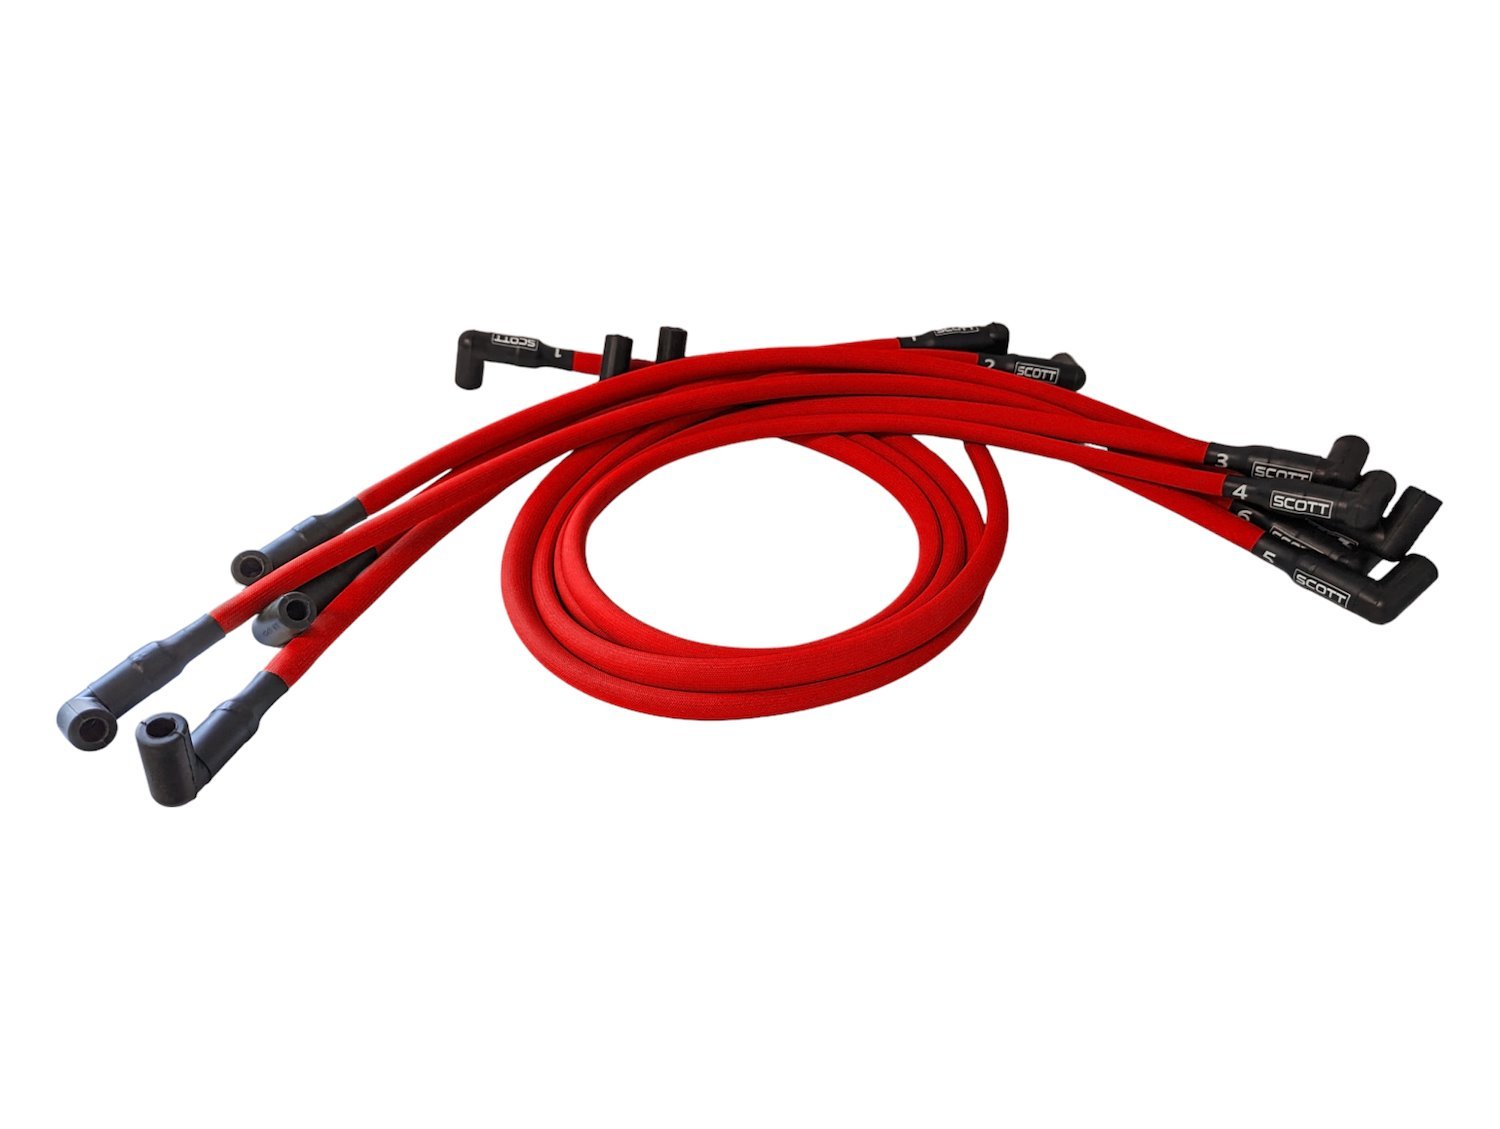 SPW-PS-435-2 High-Performance Fiberglass-Oversleeved Spark Plug Wire Set for Small Block Chevy, Around Front [Red]